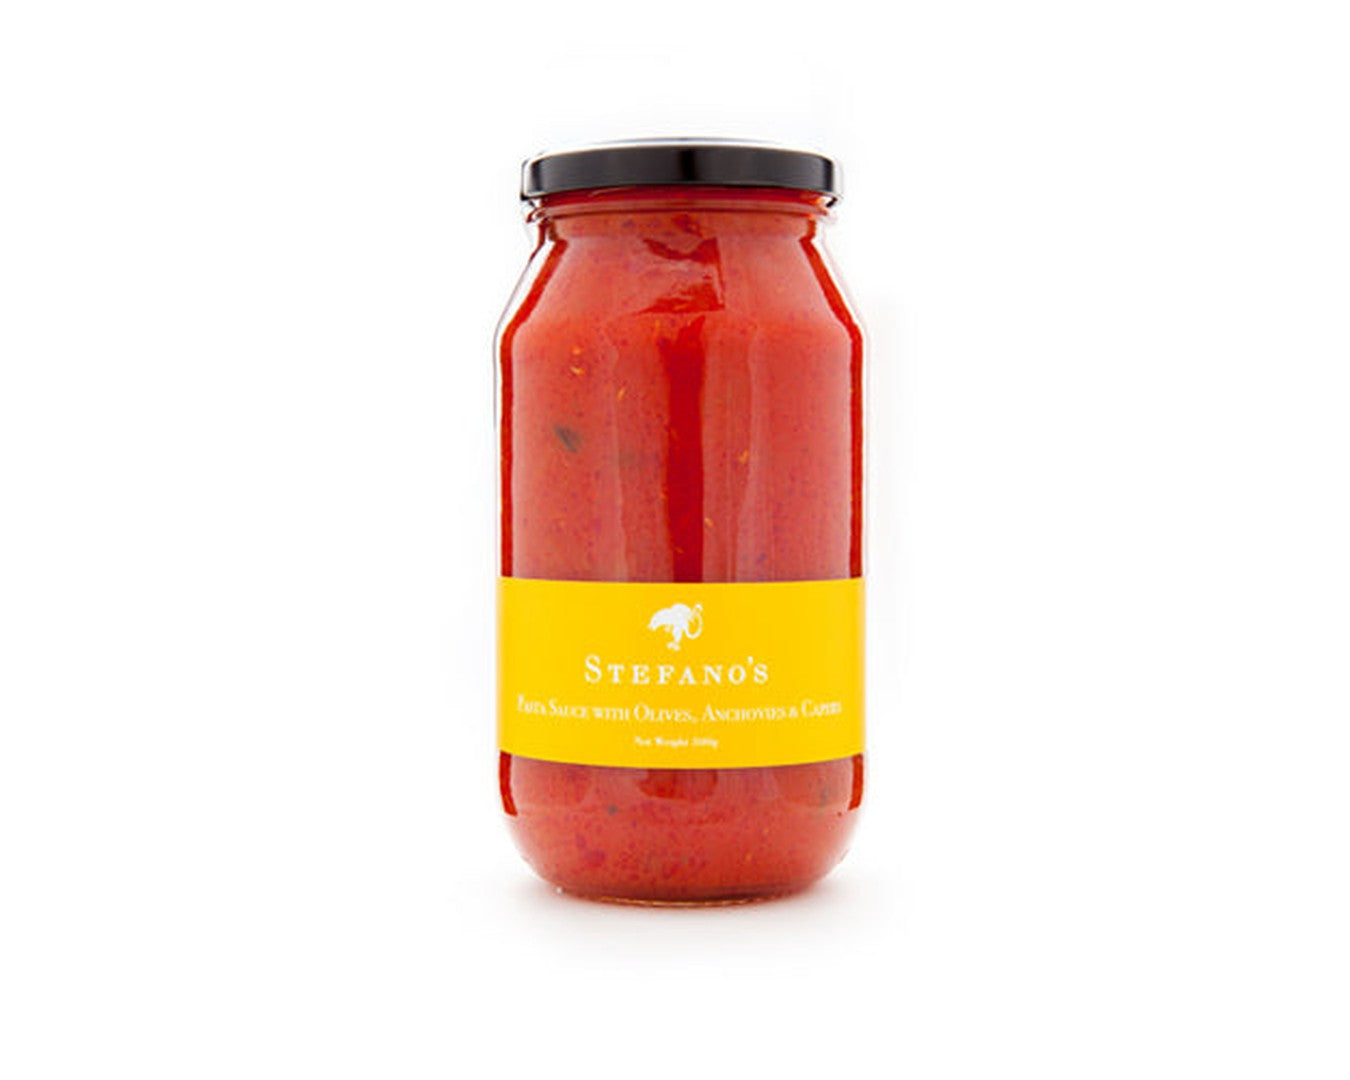 Stefano's Pasta Sauce with Olive, Anchovies & Capers 530g-Pasta Sauce-The Local Basket